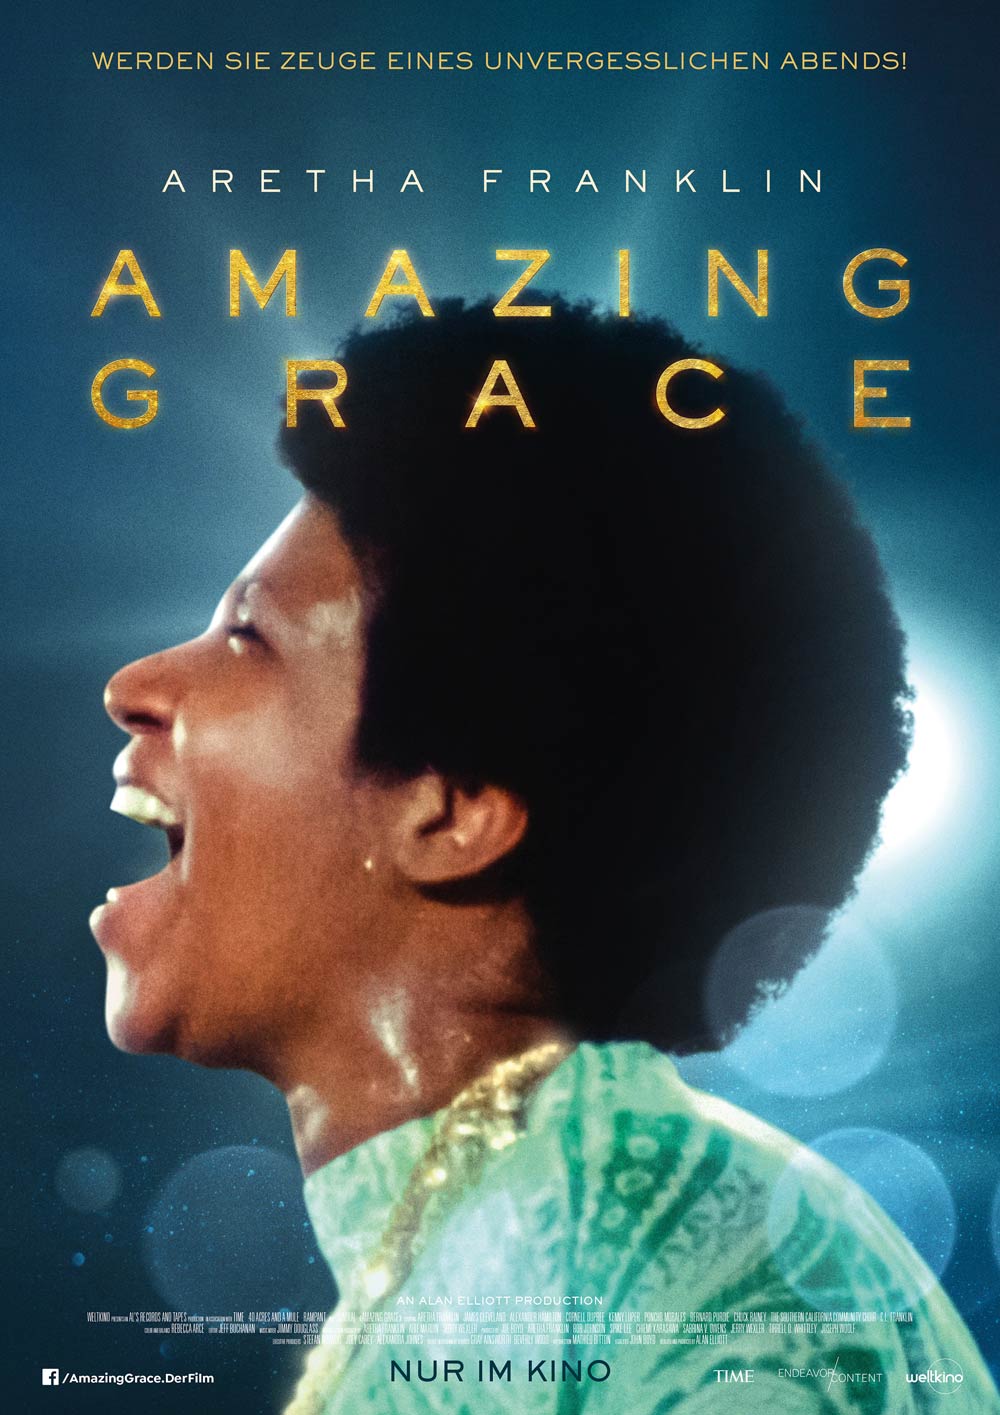 Aretha Franklin: Amazing Grace Filmposter